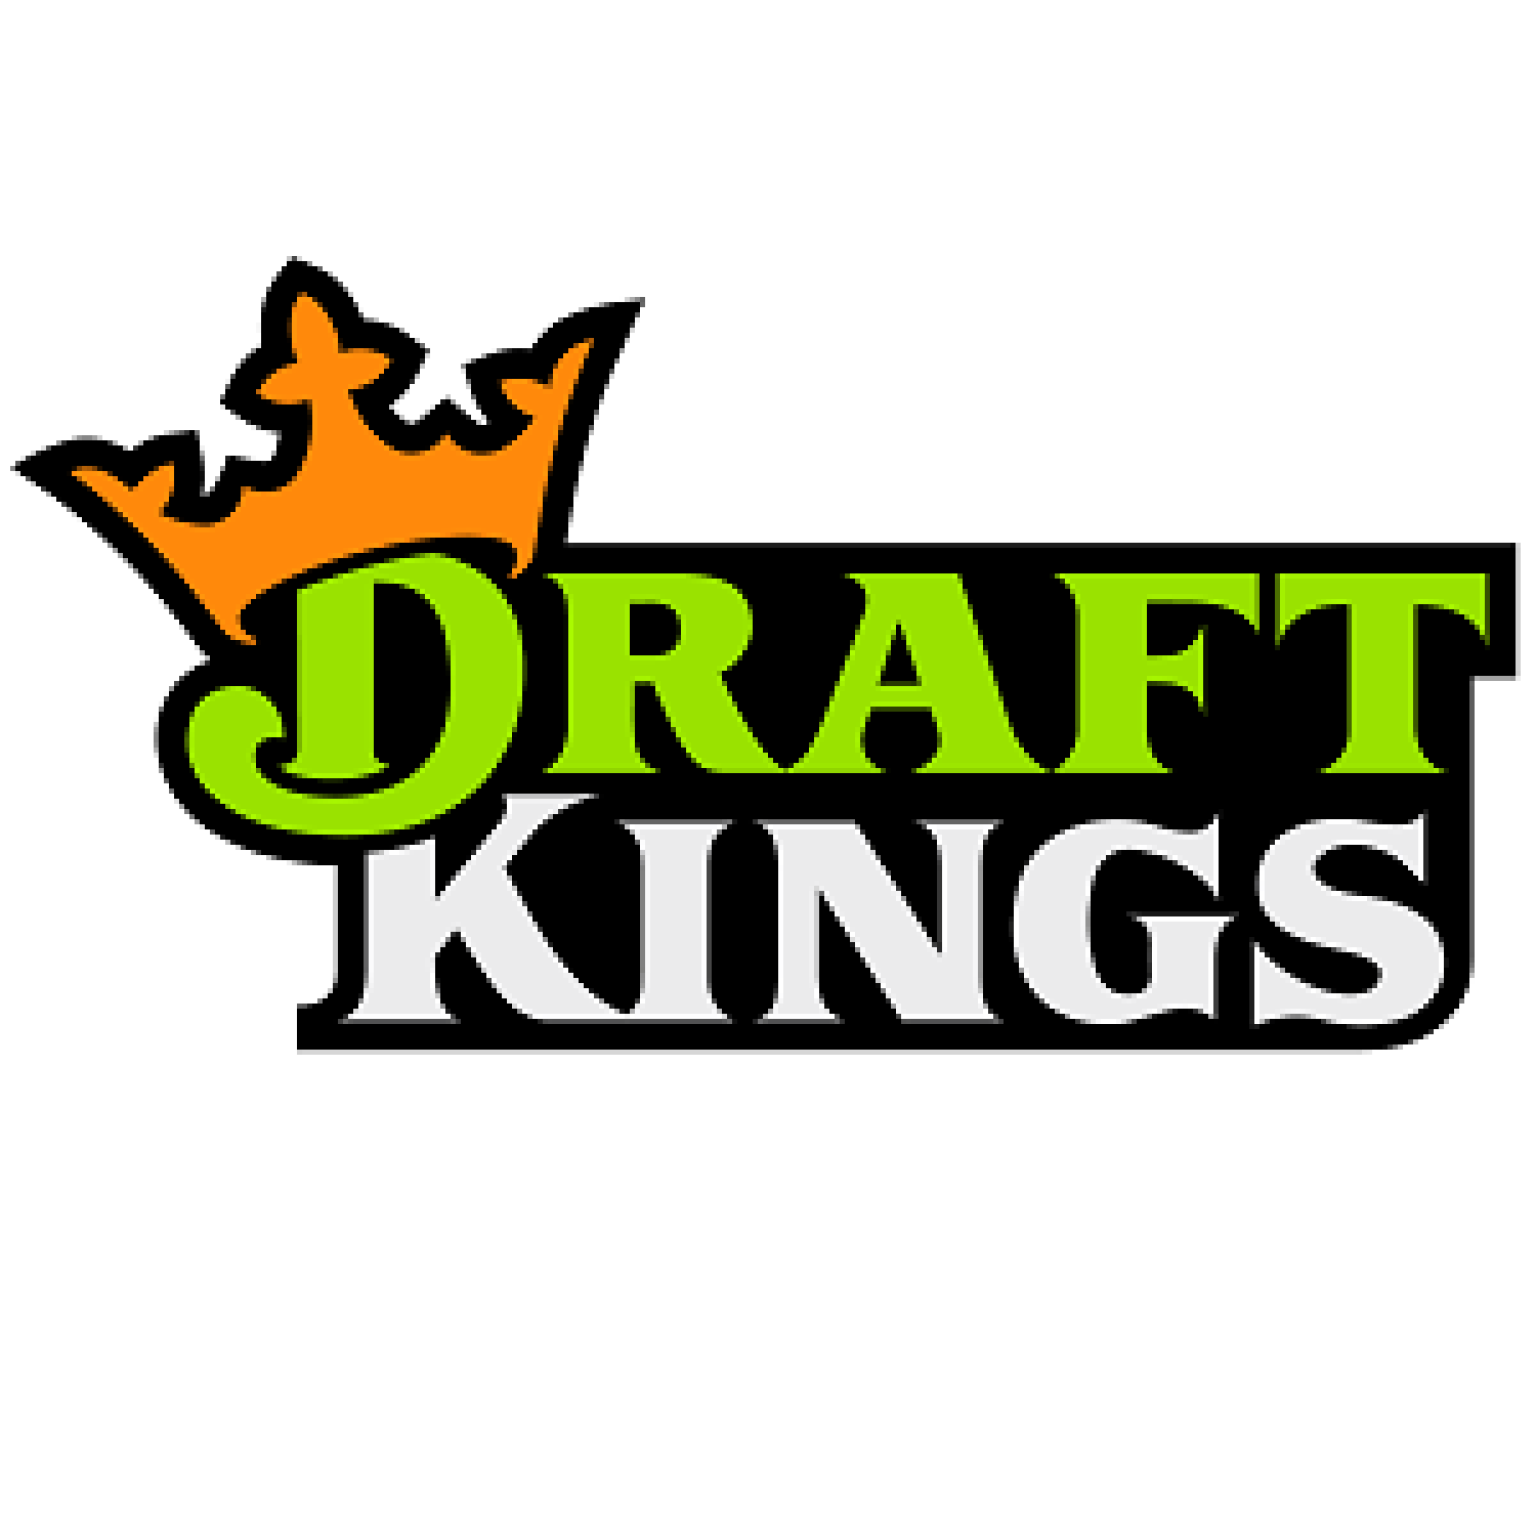 do draftkings have a partnership wth casino